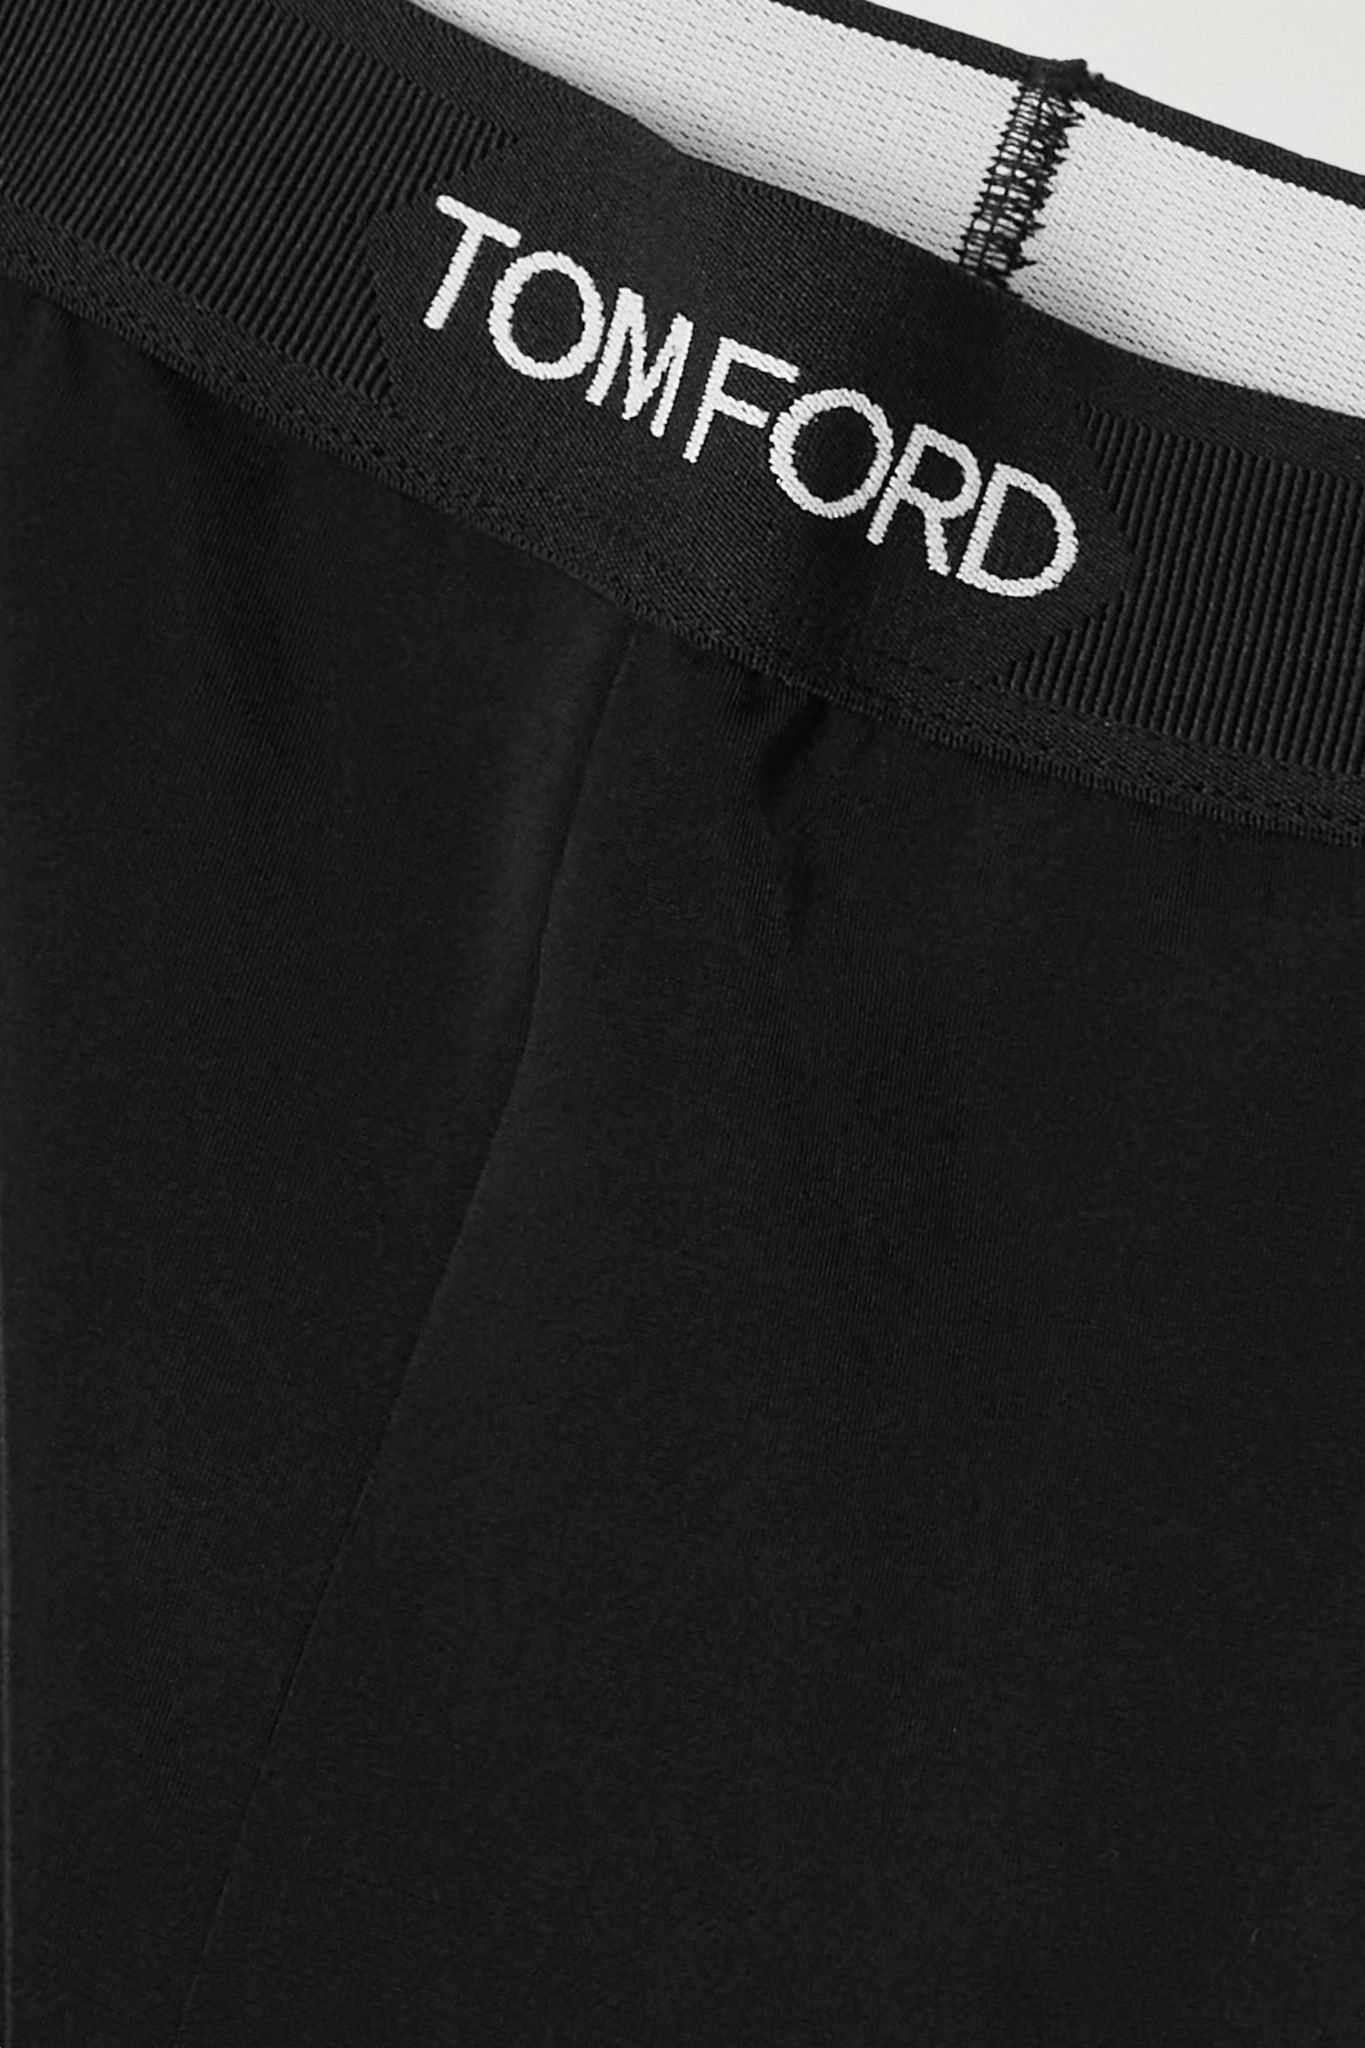 TOM FORD Jacquard-trimmed stretch-jersey leggings